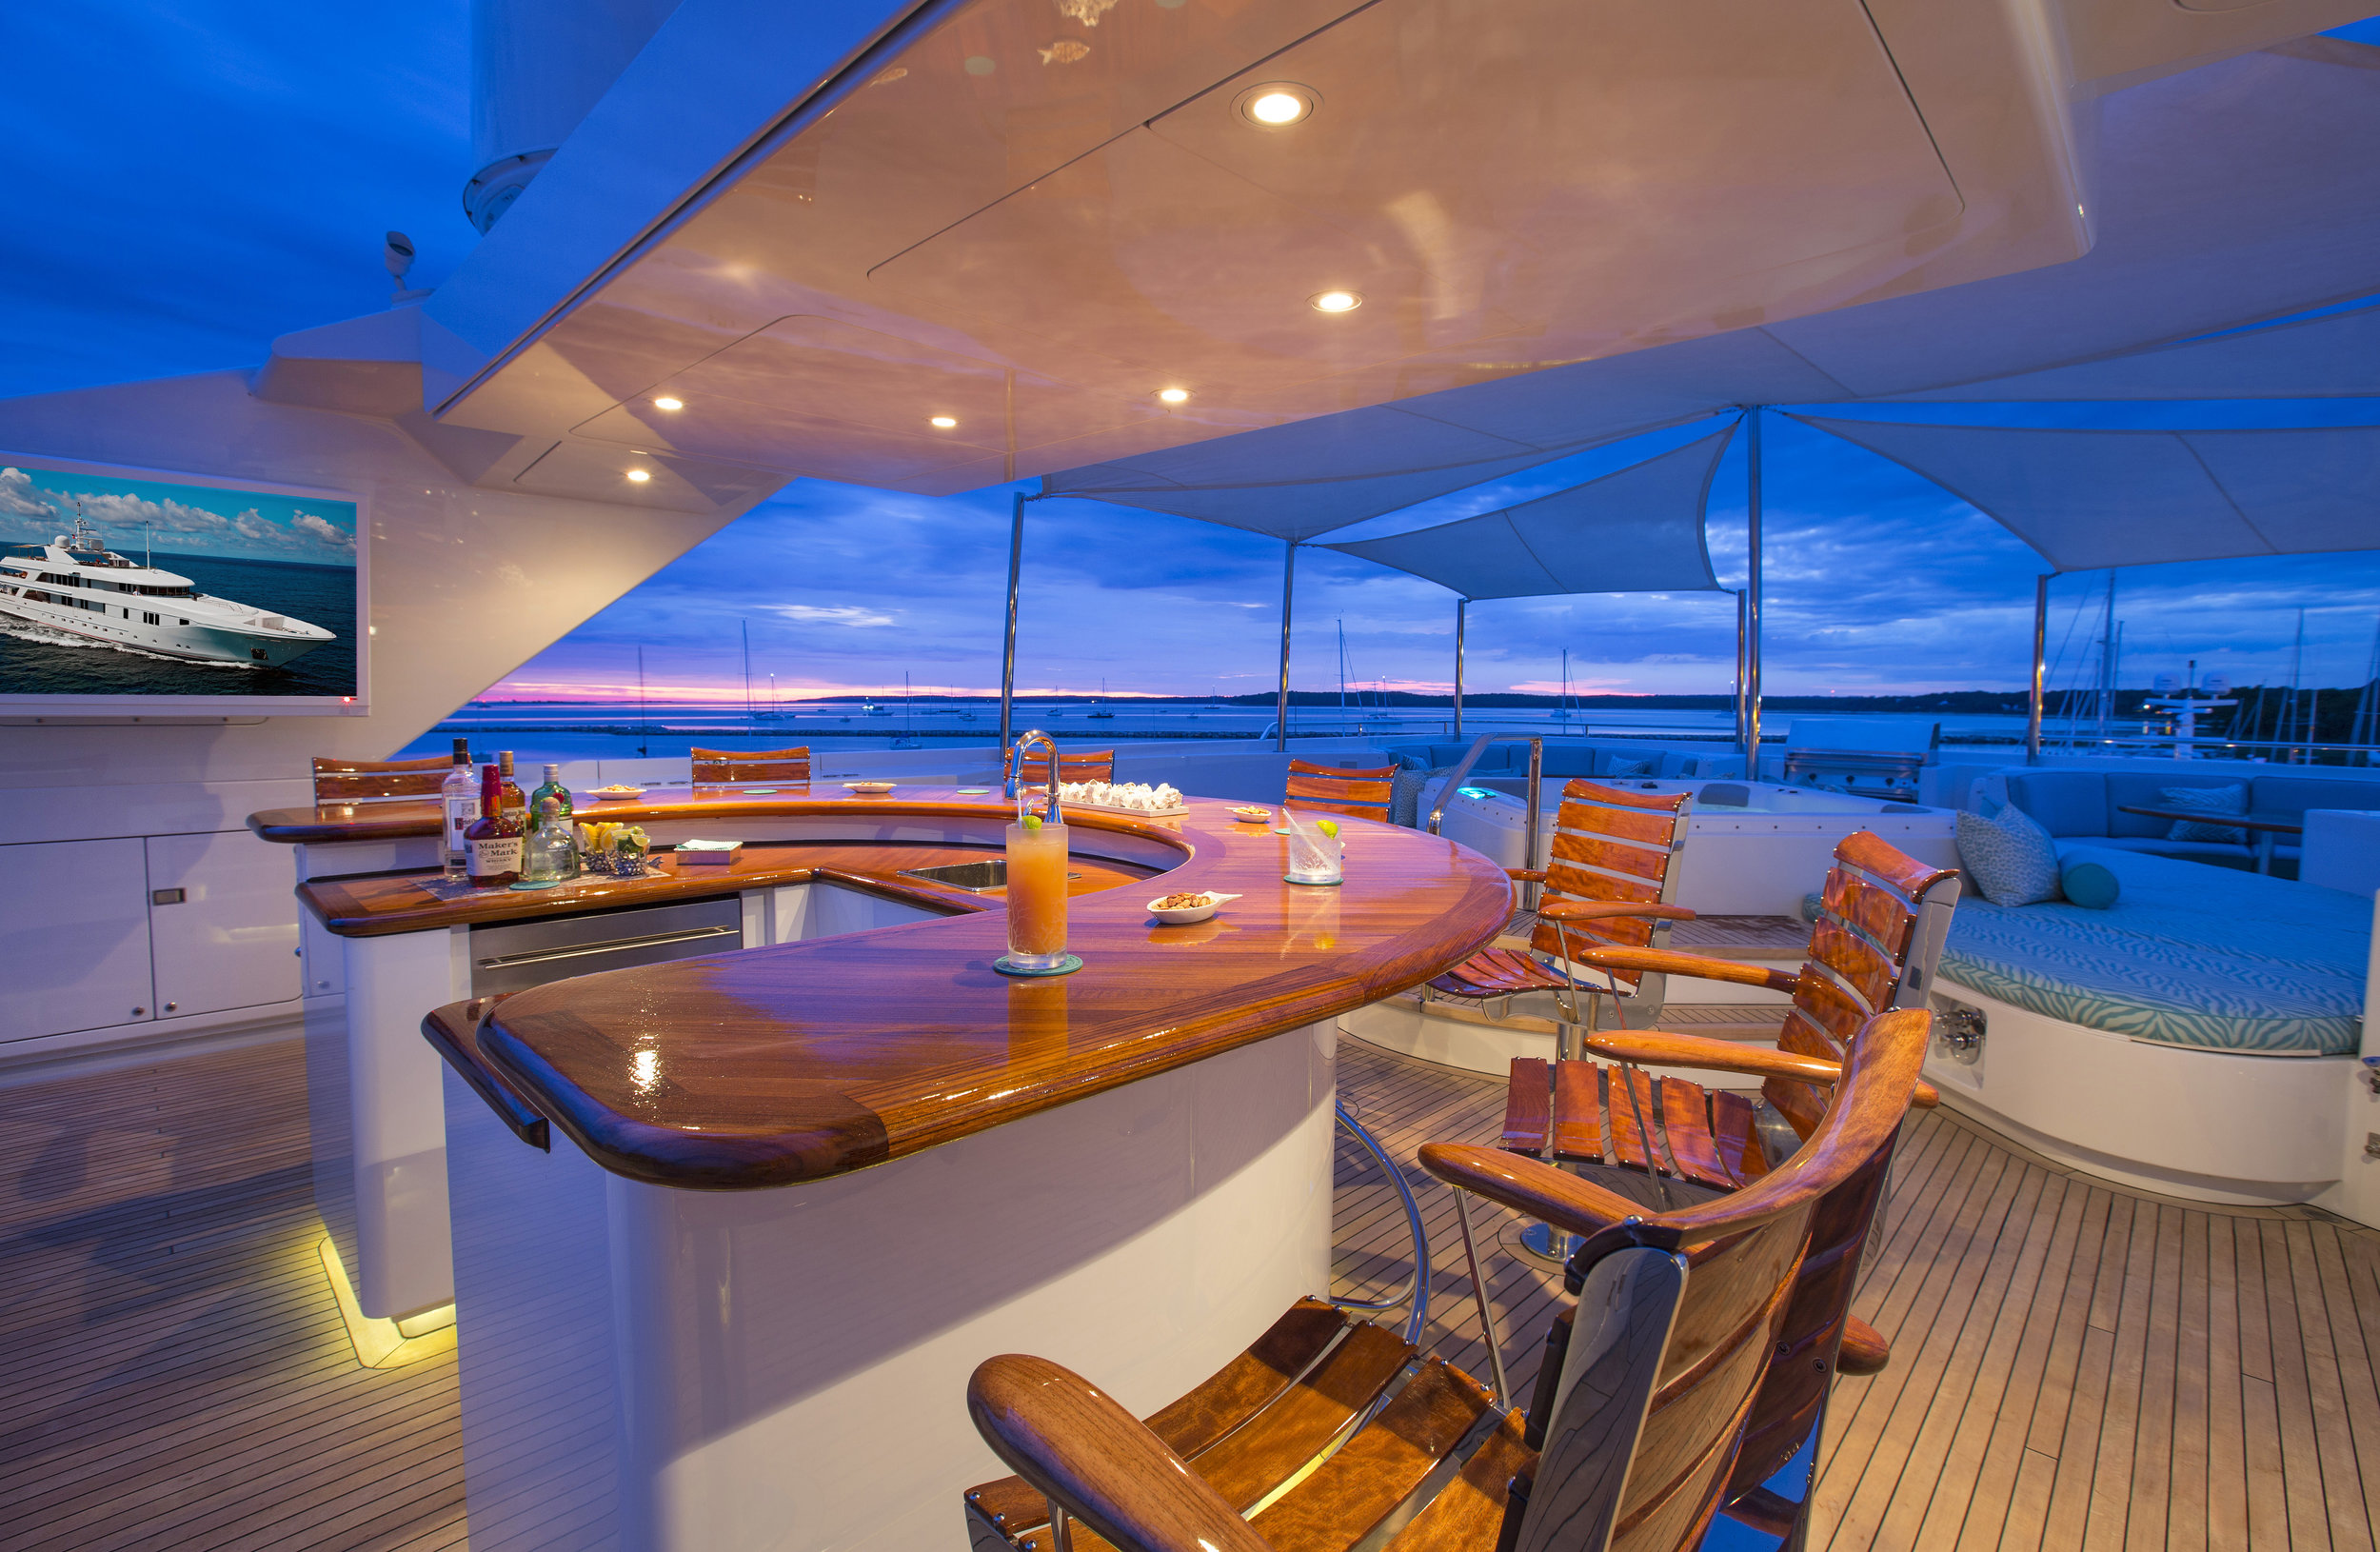  Interiors and details onboard Rhino, 154' Admiral motoryacht in Sag Harbor, NY. 